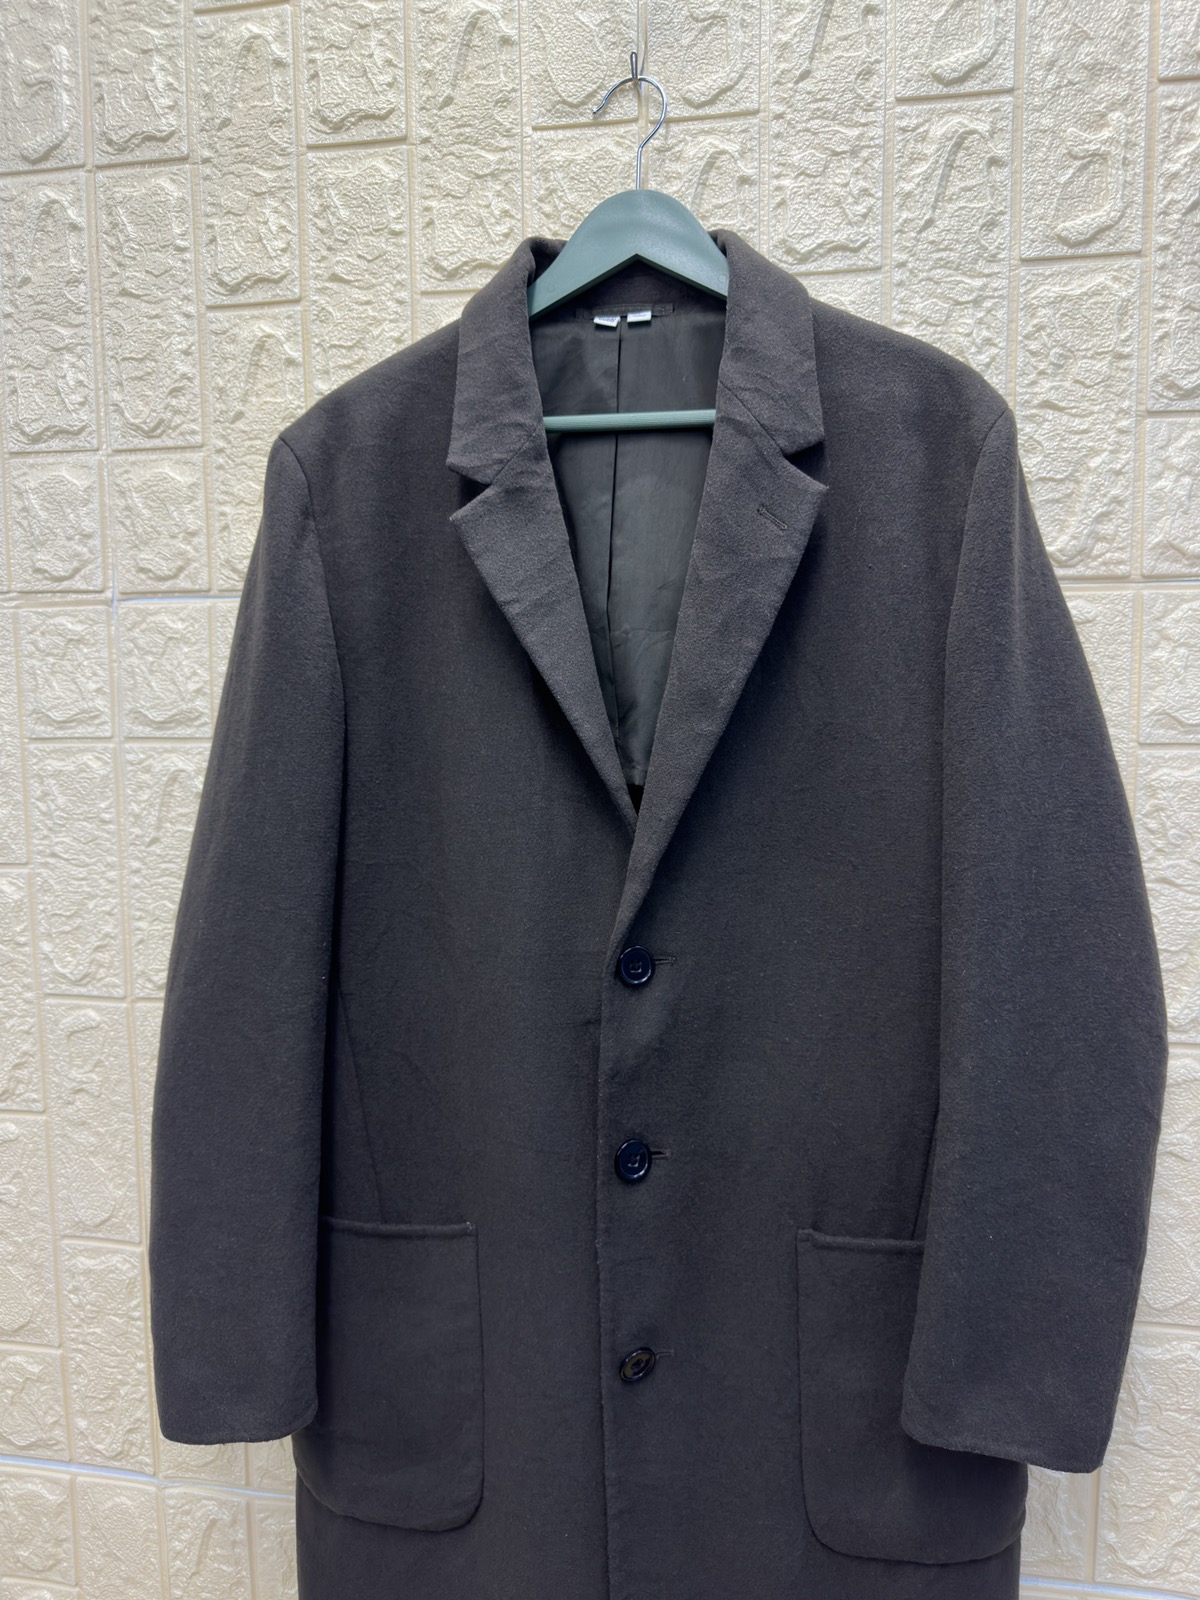 Undercover X Uniqlo Wool Trench Coat-GR97 - 2